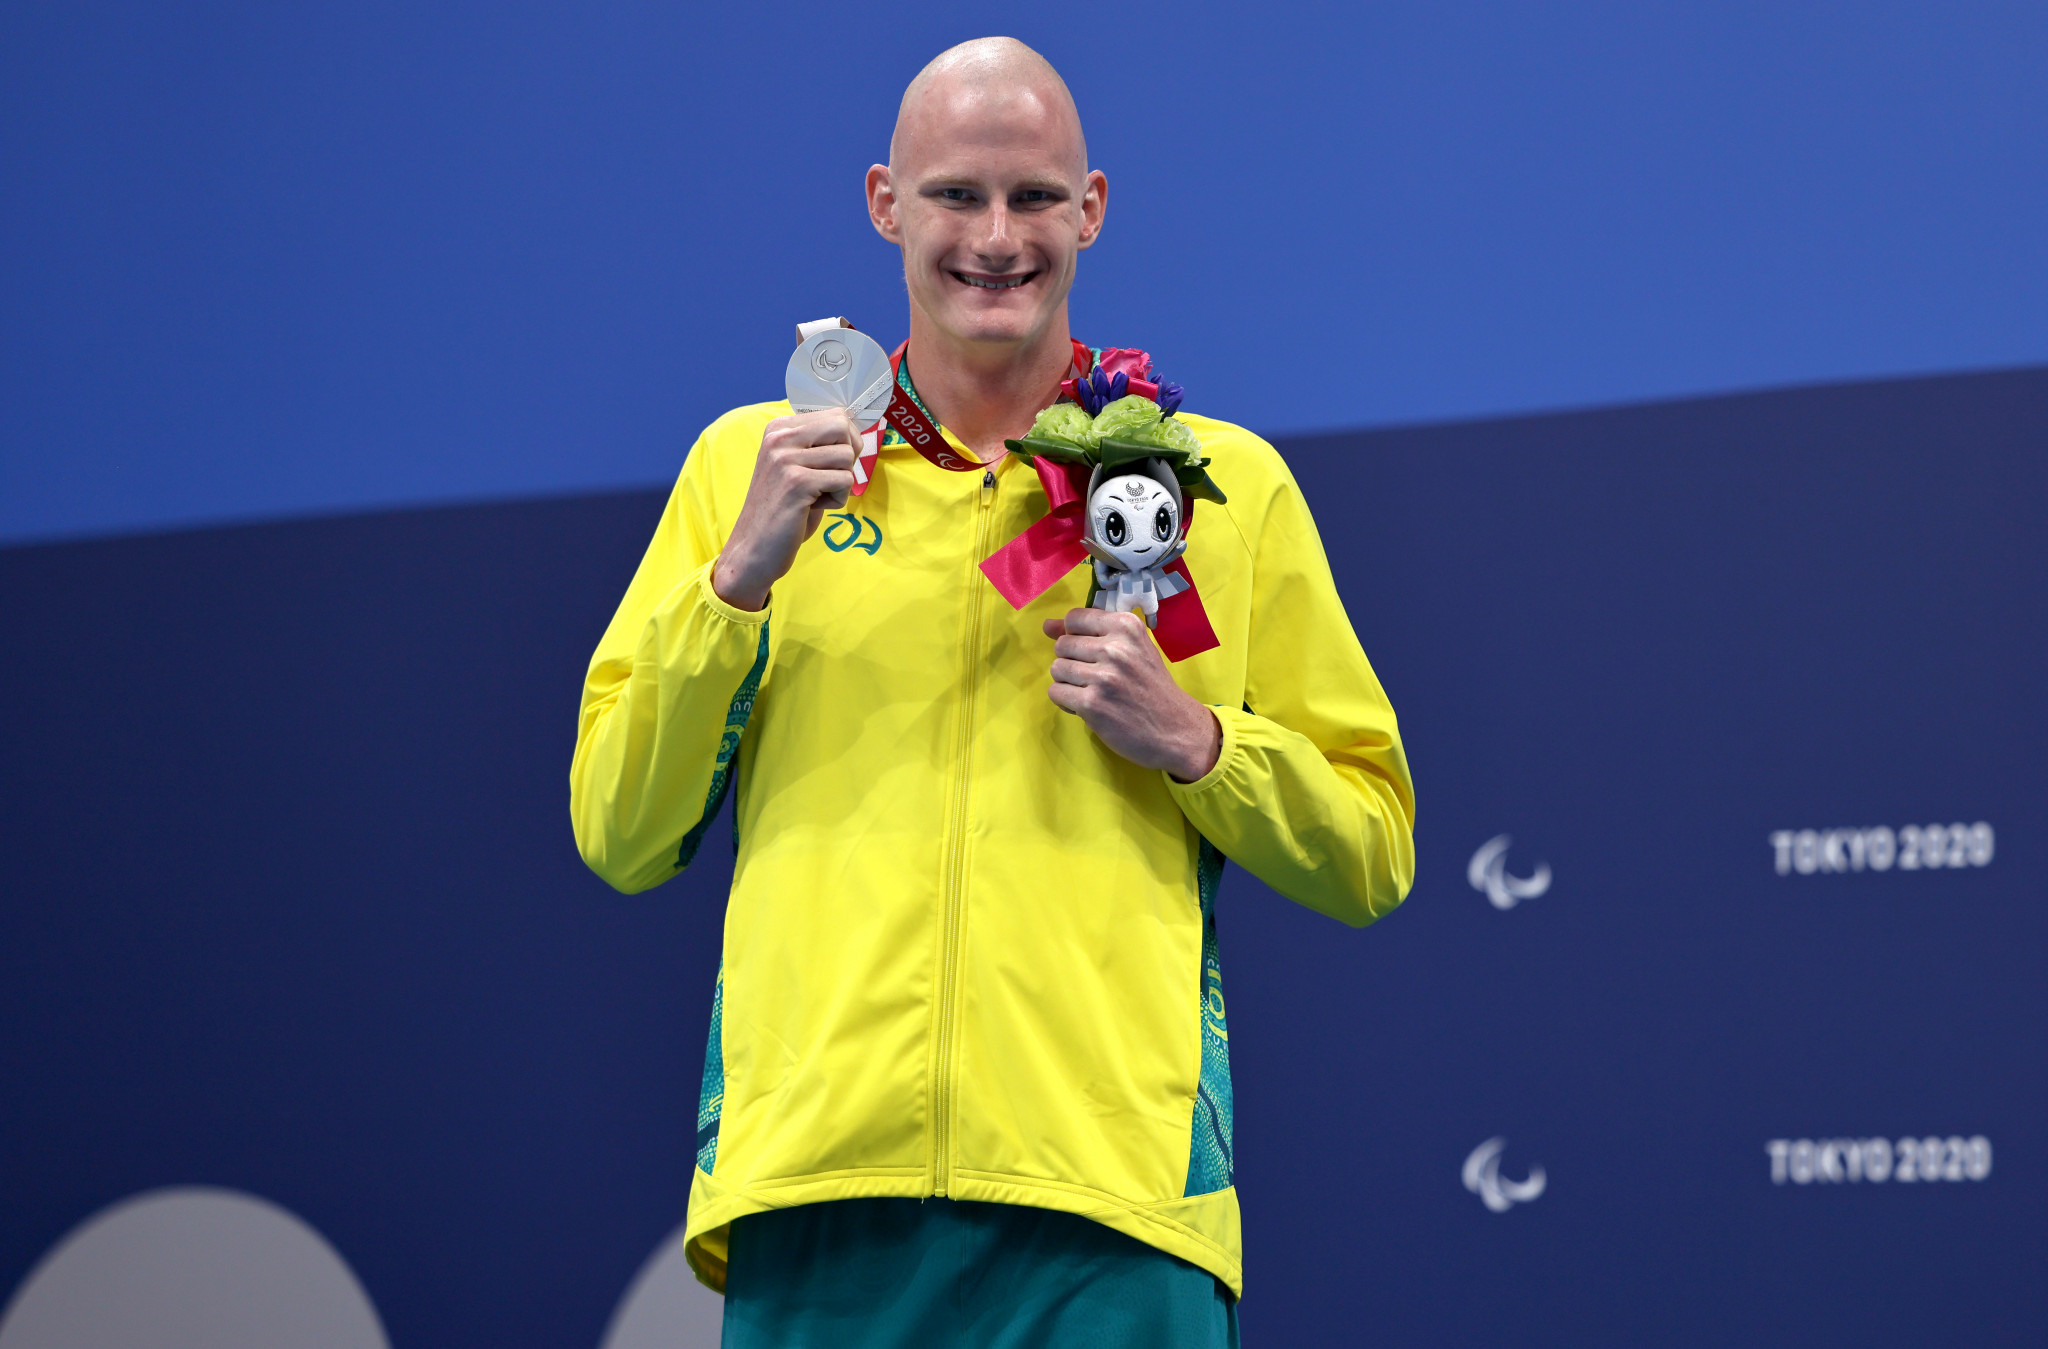 Australian Para swimmer Rowan Crothers was among the athletes who joined calls for Channel Nine to seek to secure rights to broadcast future Paralympics ©Getty Images  